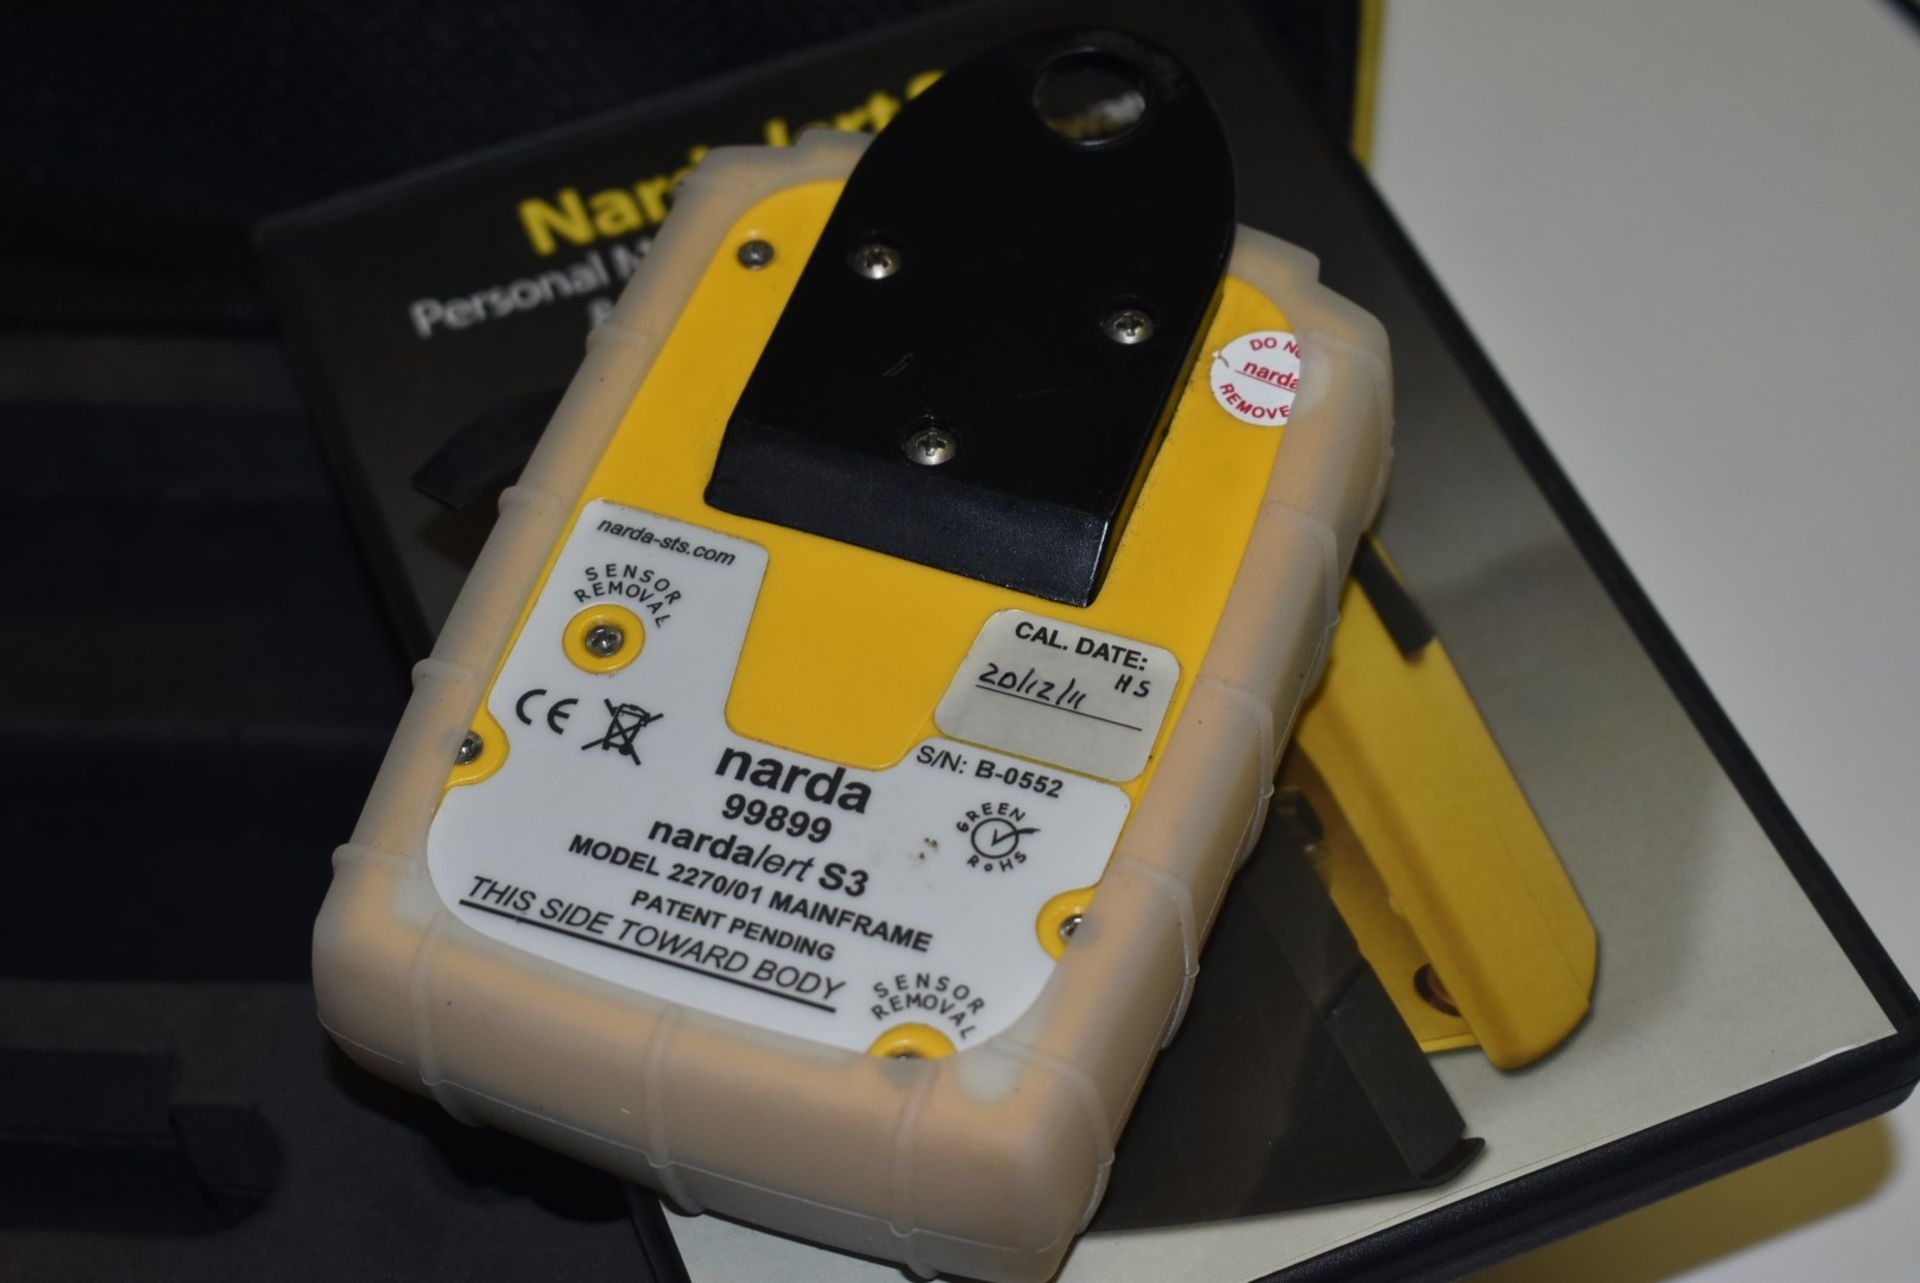 1 x Nardalert S3 None Ionizing Radiation Monitor - Model 2270/01 Mainframe - Includes Protection - Image 4 of 6